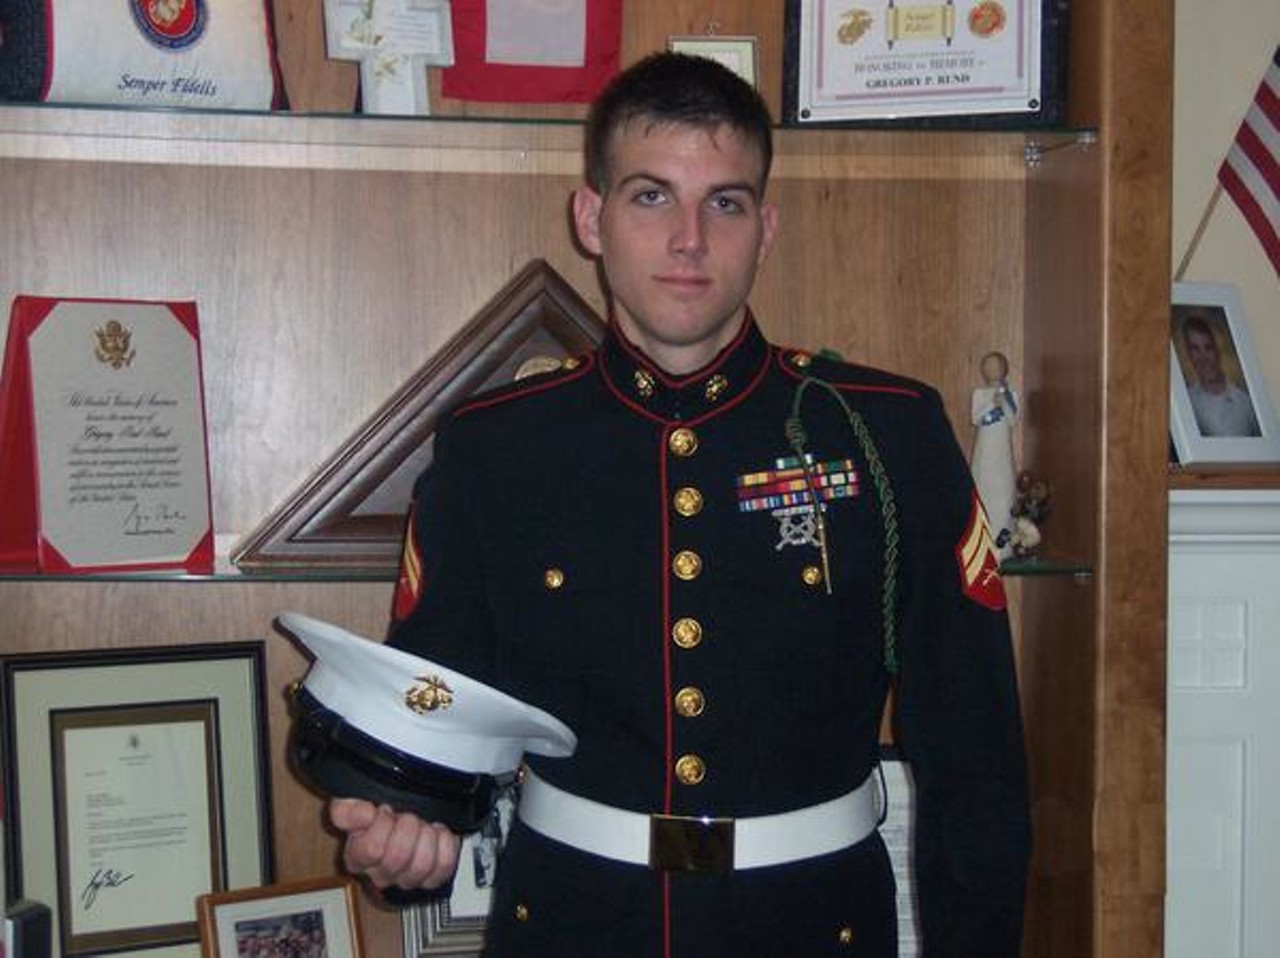 After exiting the Marines in 2006, Fred poses with his dress blues uniform in the home of Gregory Rund. A Littleton, Colo. native, Rund was killed in action during the Second Battle of Fallujah in Dec. 2004.